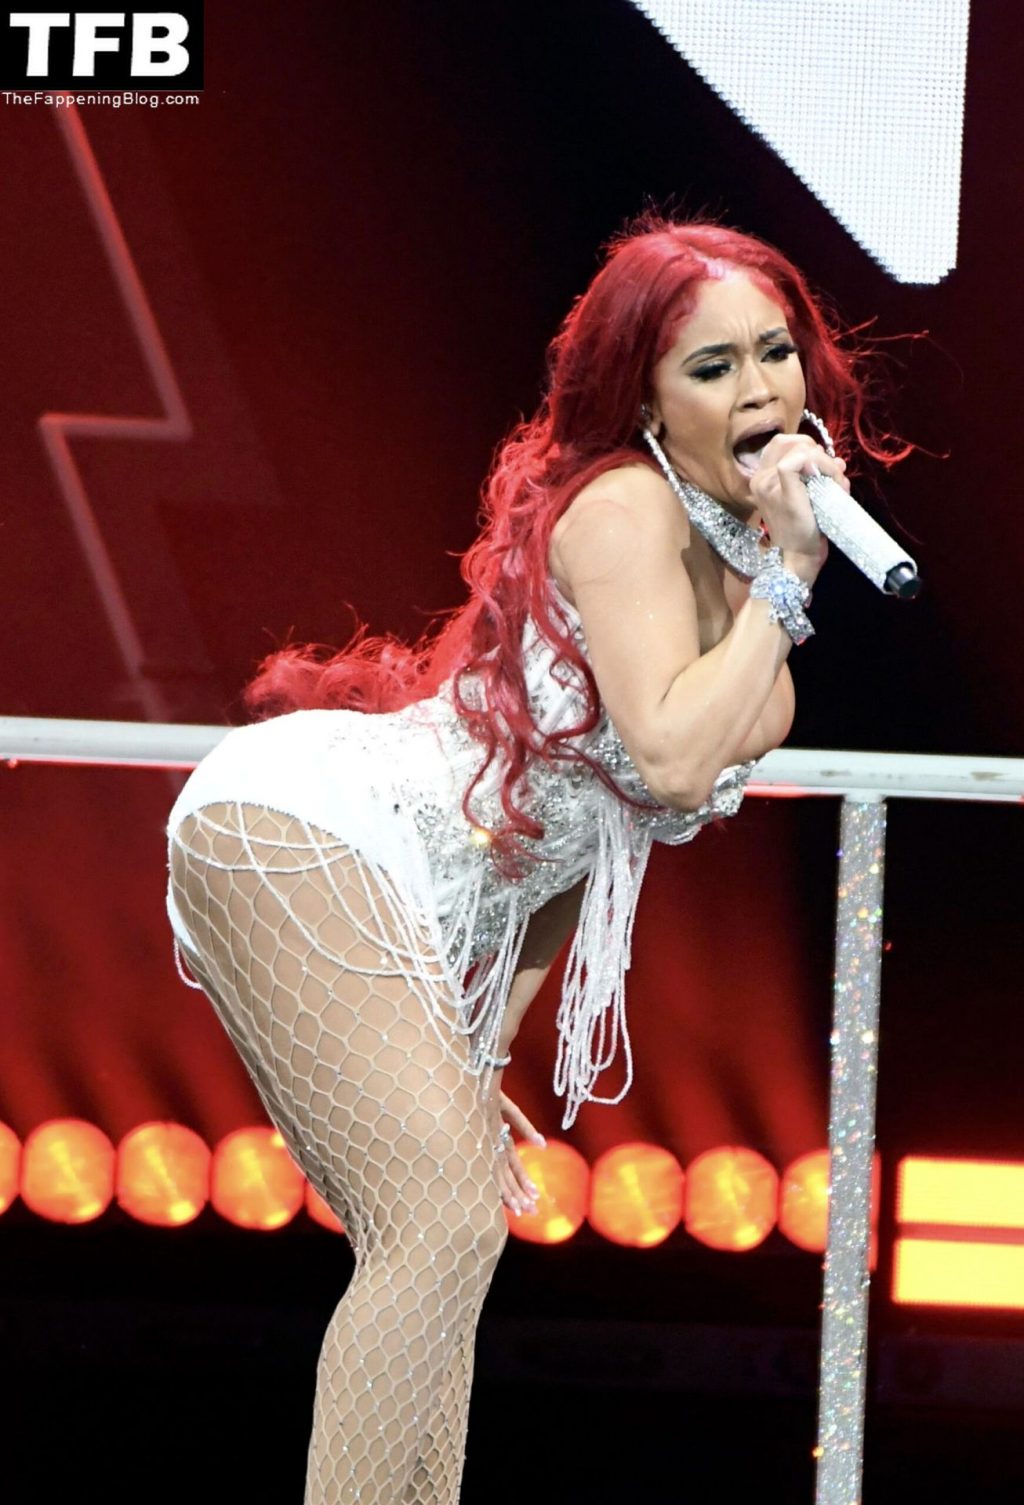 Saweetie Looks Hot on Stage at iHeartRadio Q102’s Jingle Ball (10 Photos)